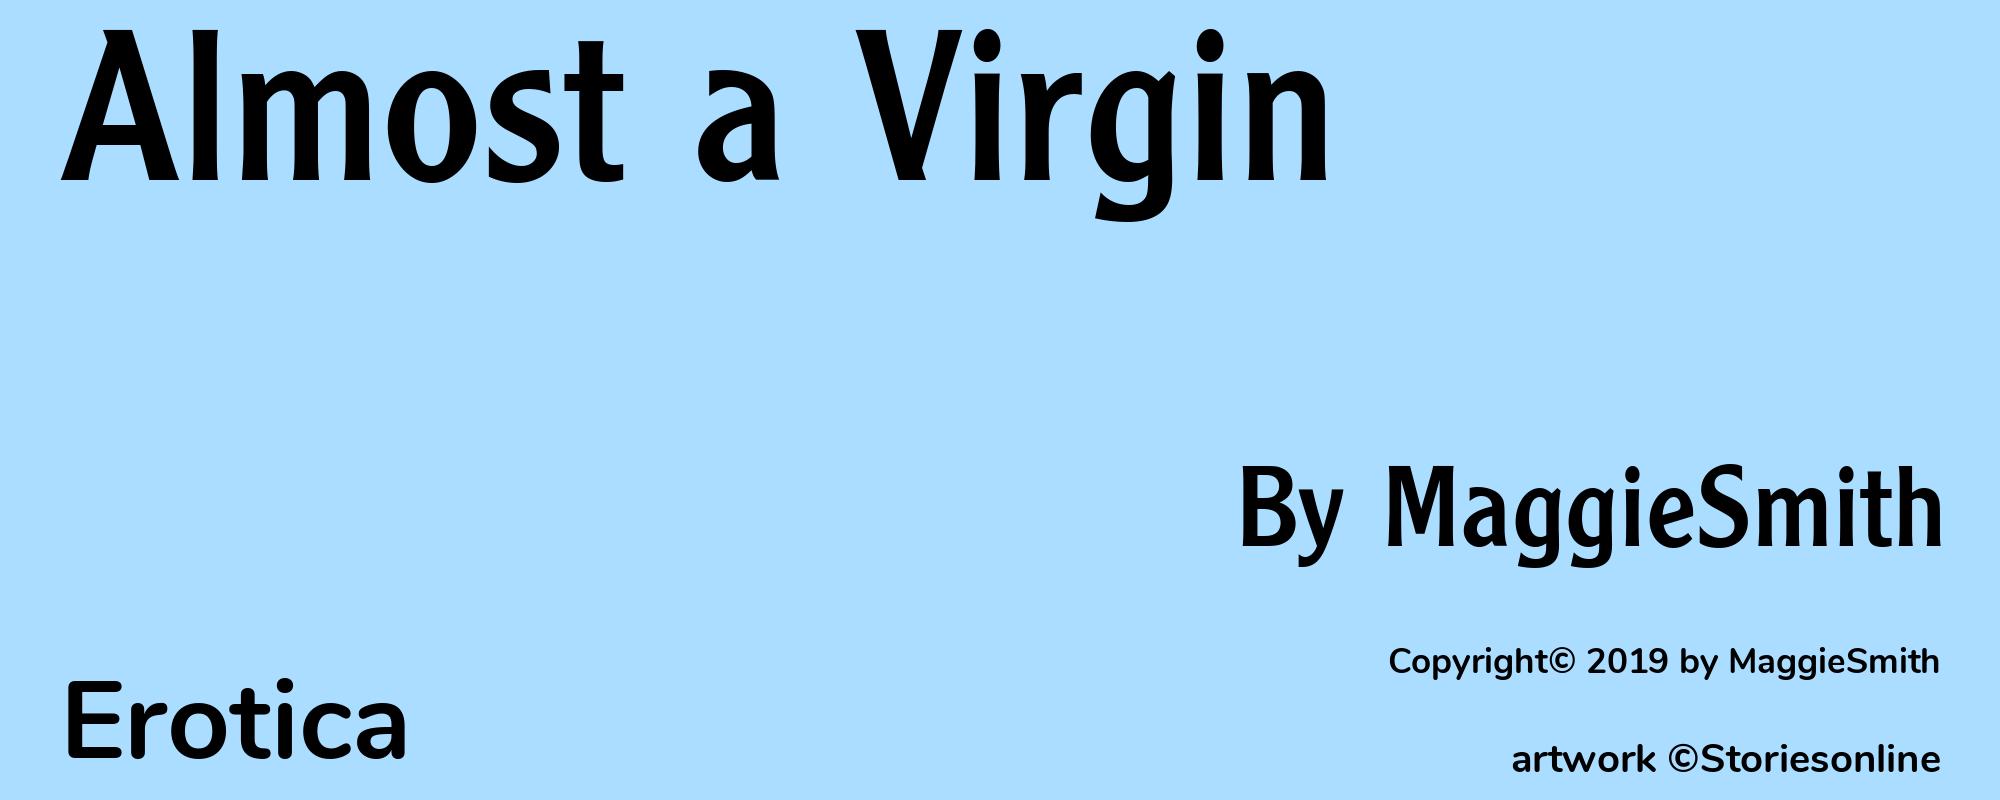 Almost a Virgin - Cover